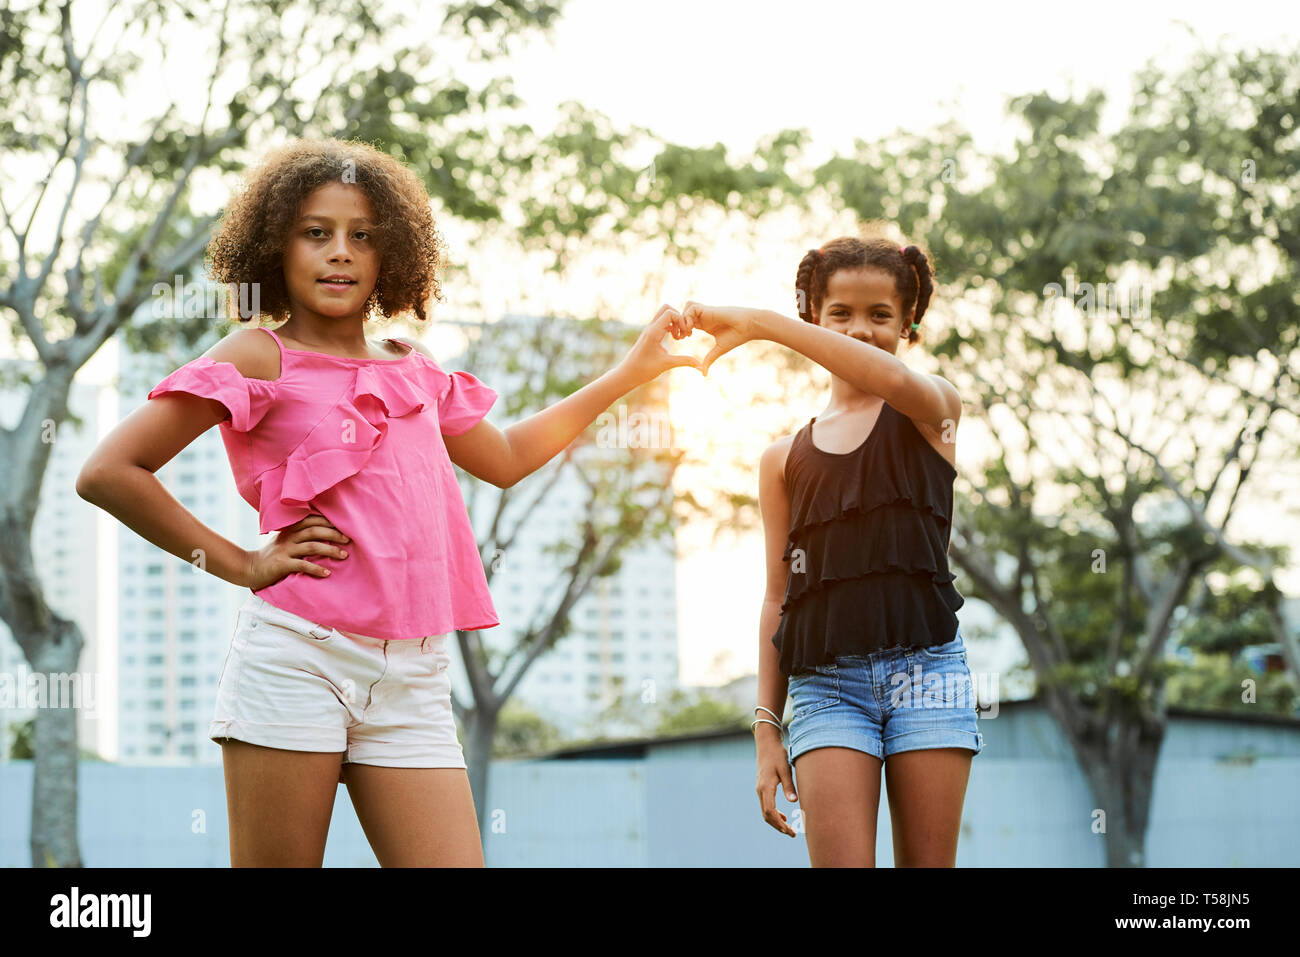 Girls joining hands in shape of heart Stock Photo